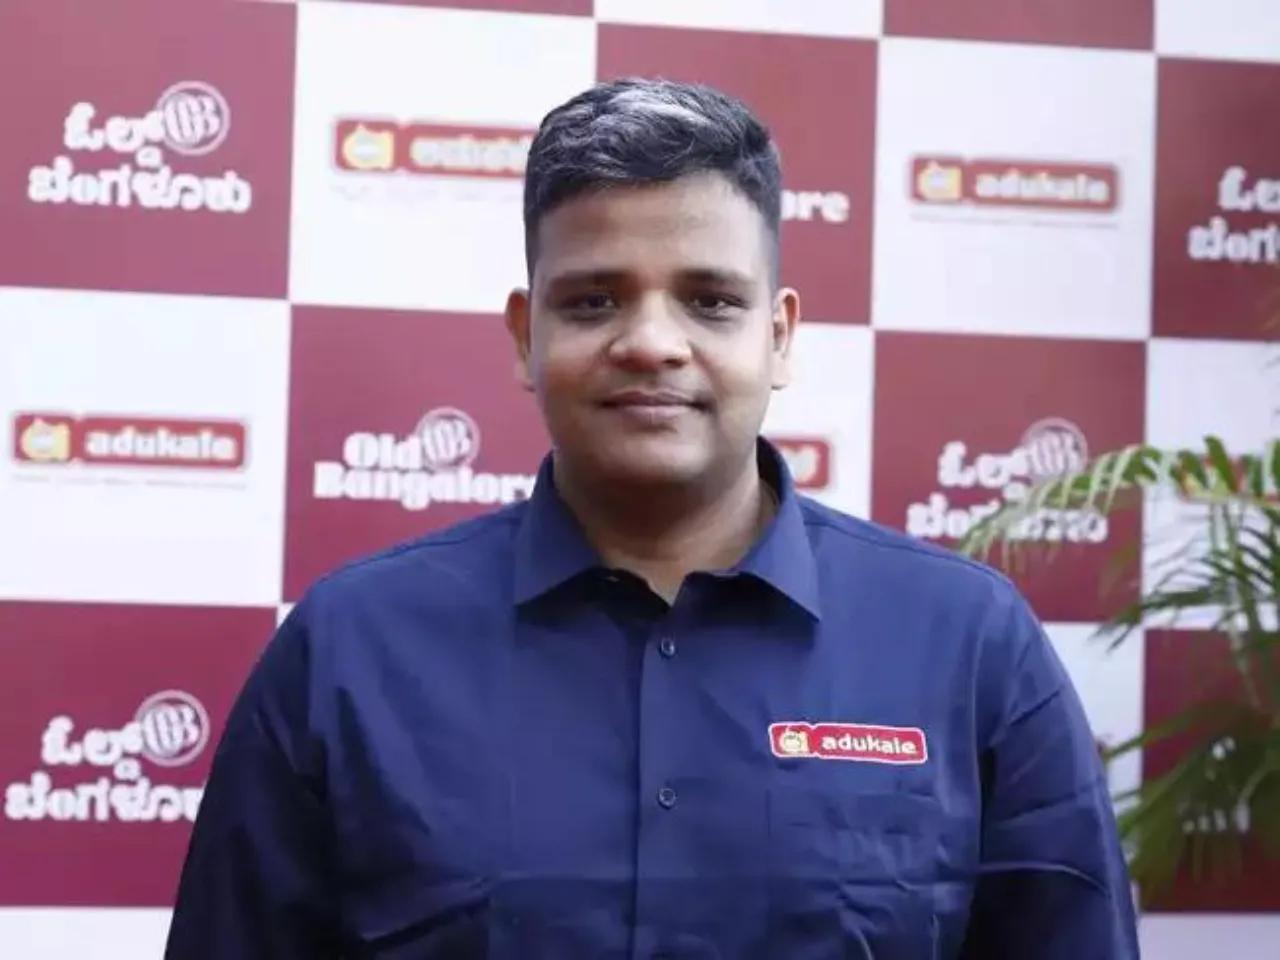 Indian D2C snacks brand Adukale raises Rs 11Cr in a pre-Series A round